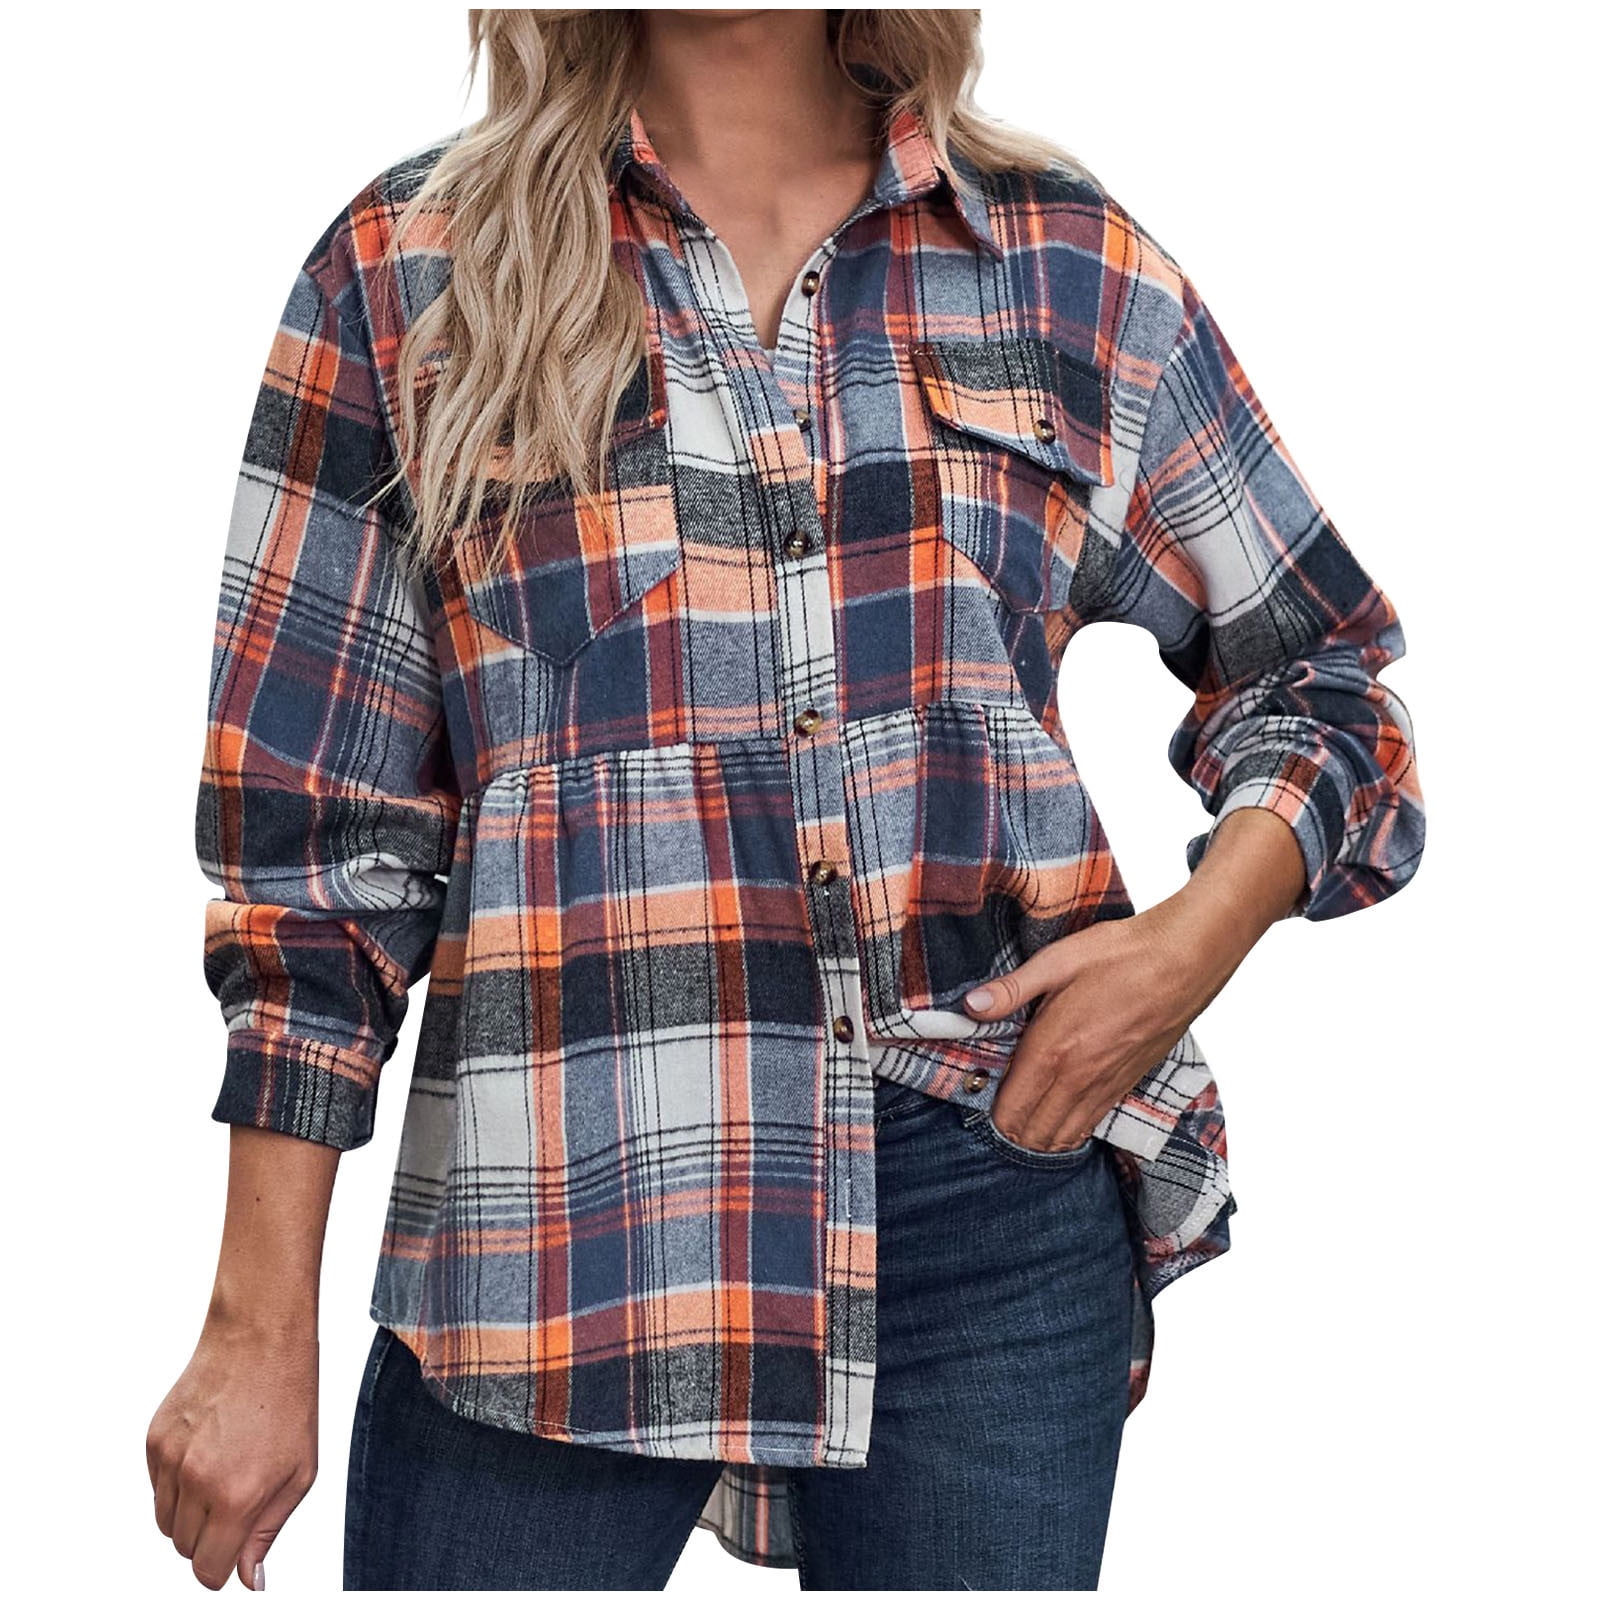 JGGSPWM Flannel Plaid Shirts for Women Oversized Button Down Shirts Blouse  Long Sleeve Fashion Shacket Jacket Fall Spring Blouse Checked Tops with